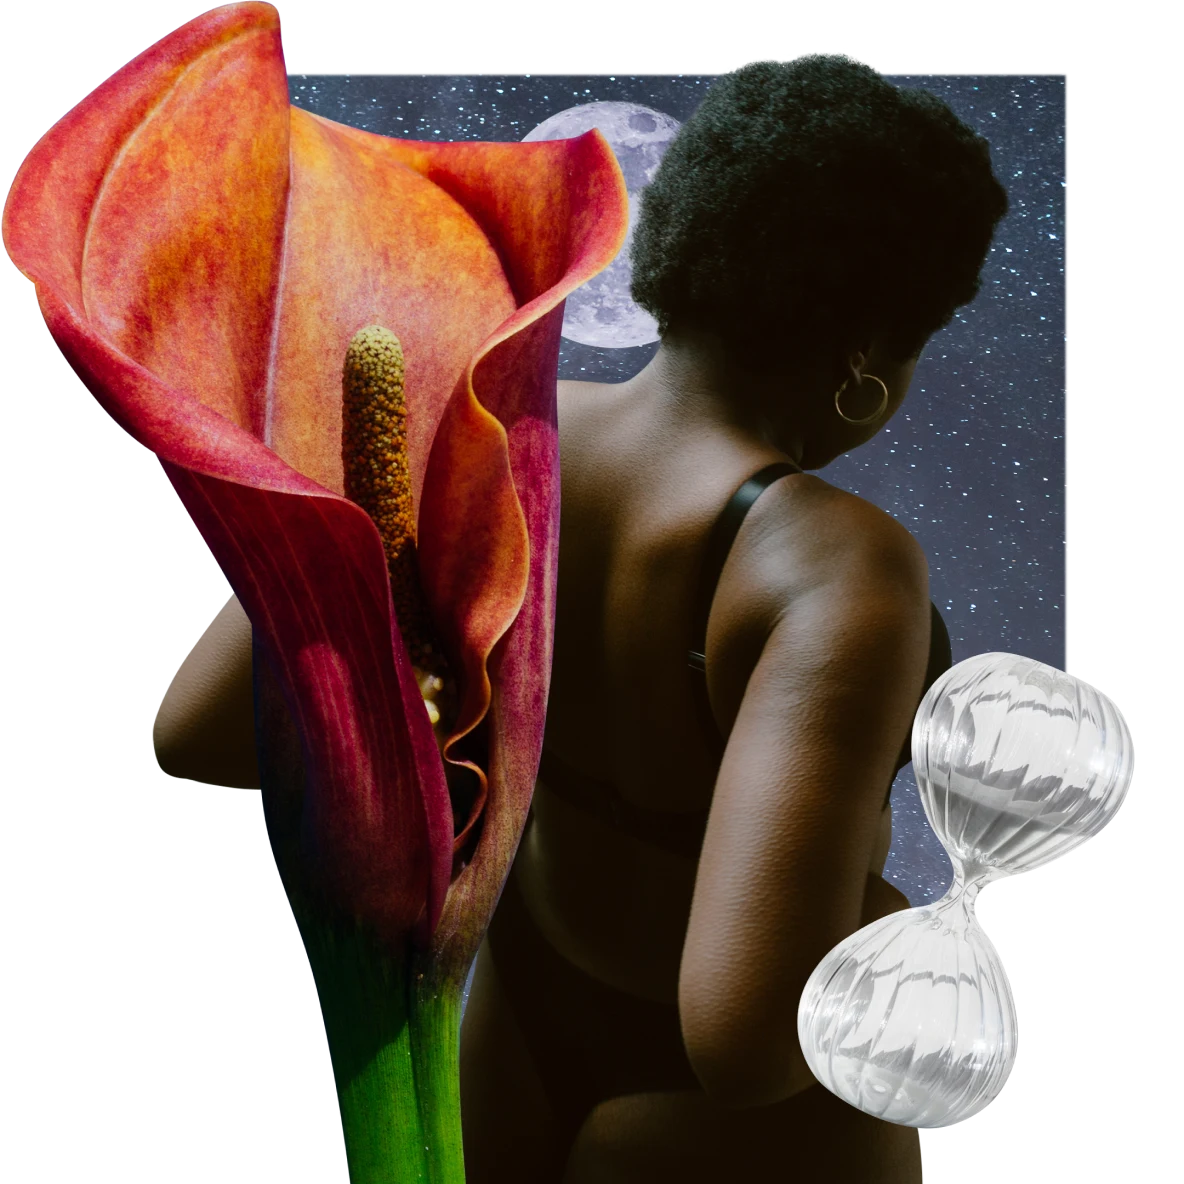 An orange calla lily is on the left. A Black woman is on the right, with her back facing out and a full moon in the night sky in the background. A crystal hourglass is on the lower right-hand side.